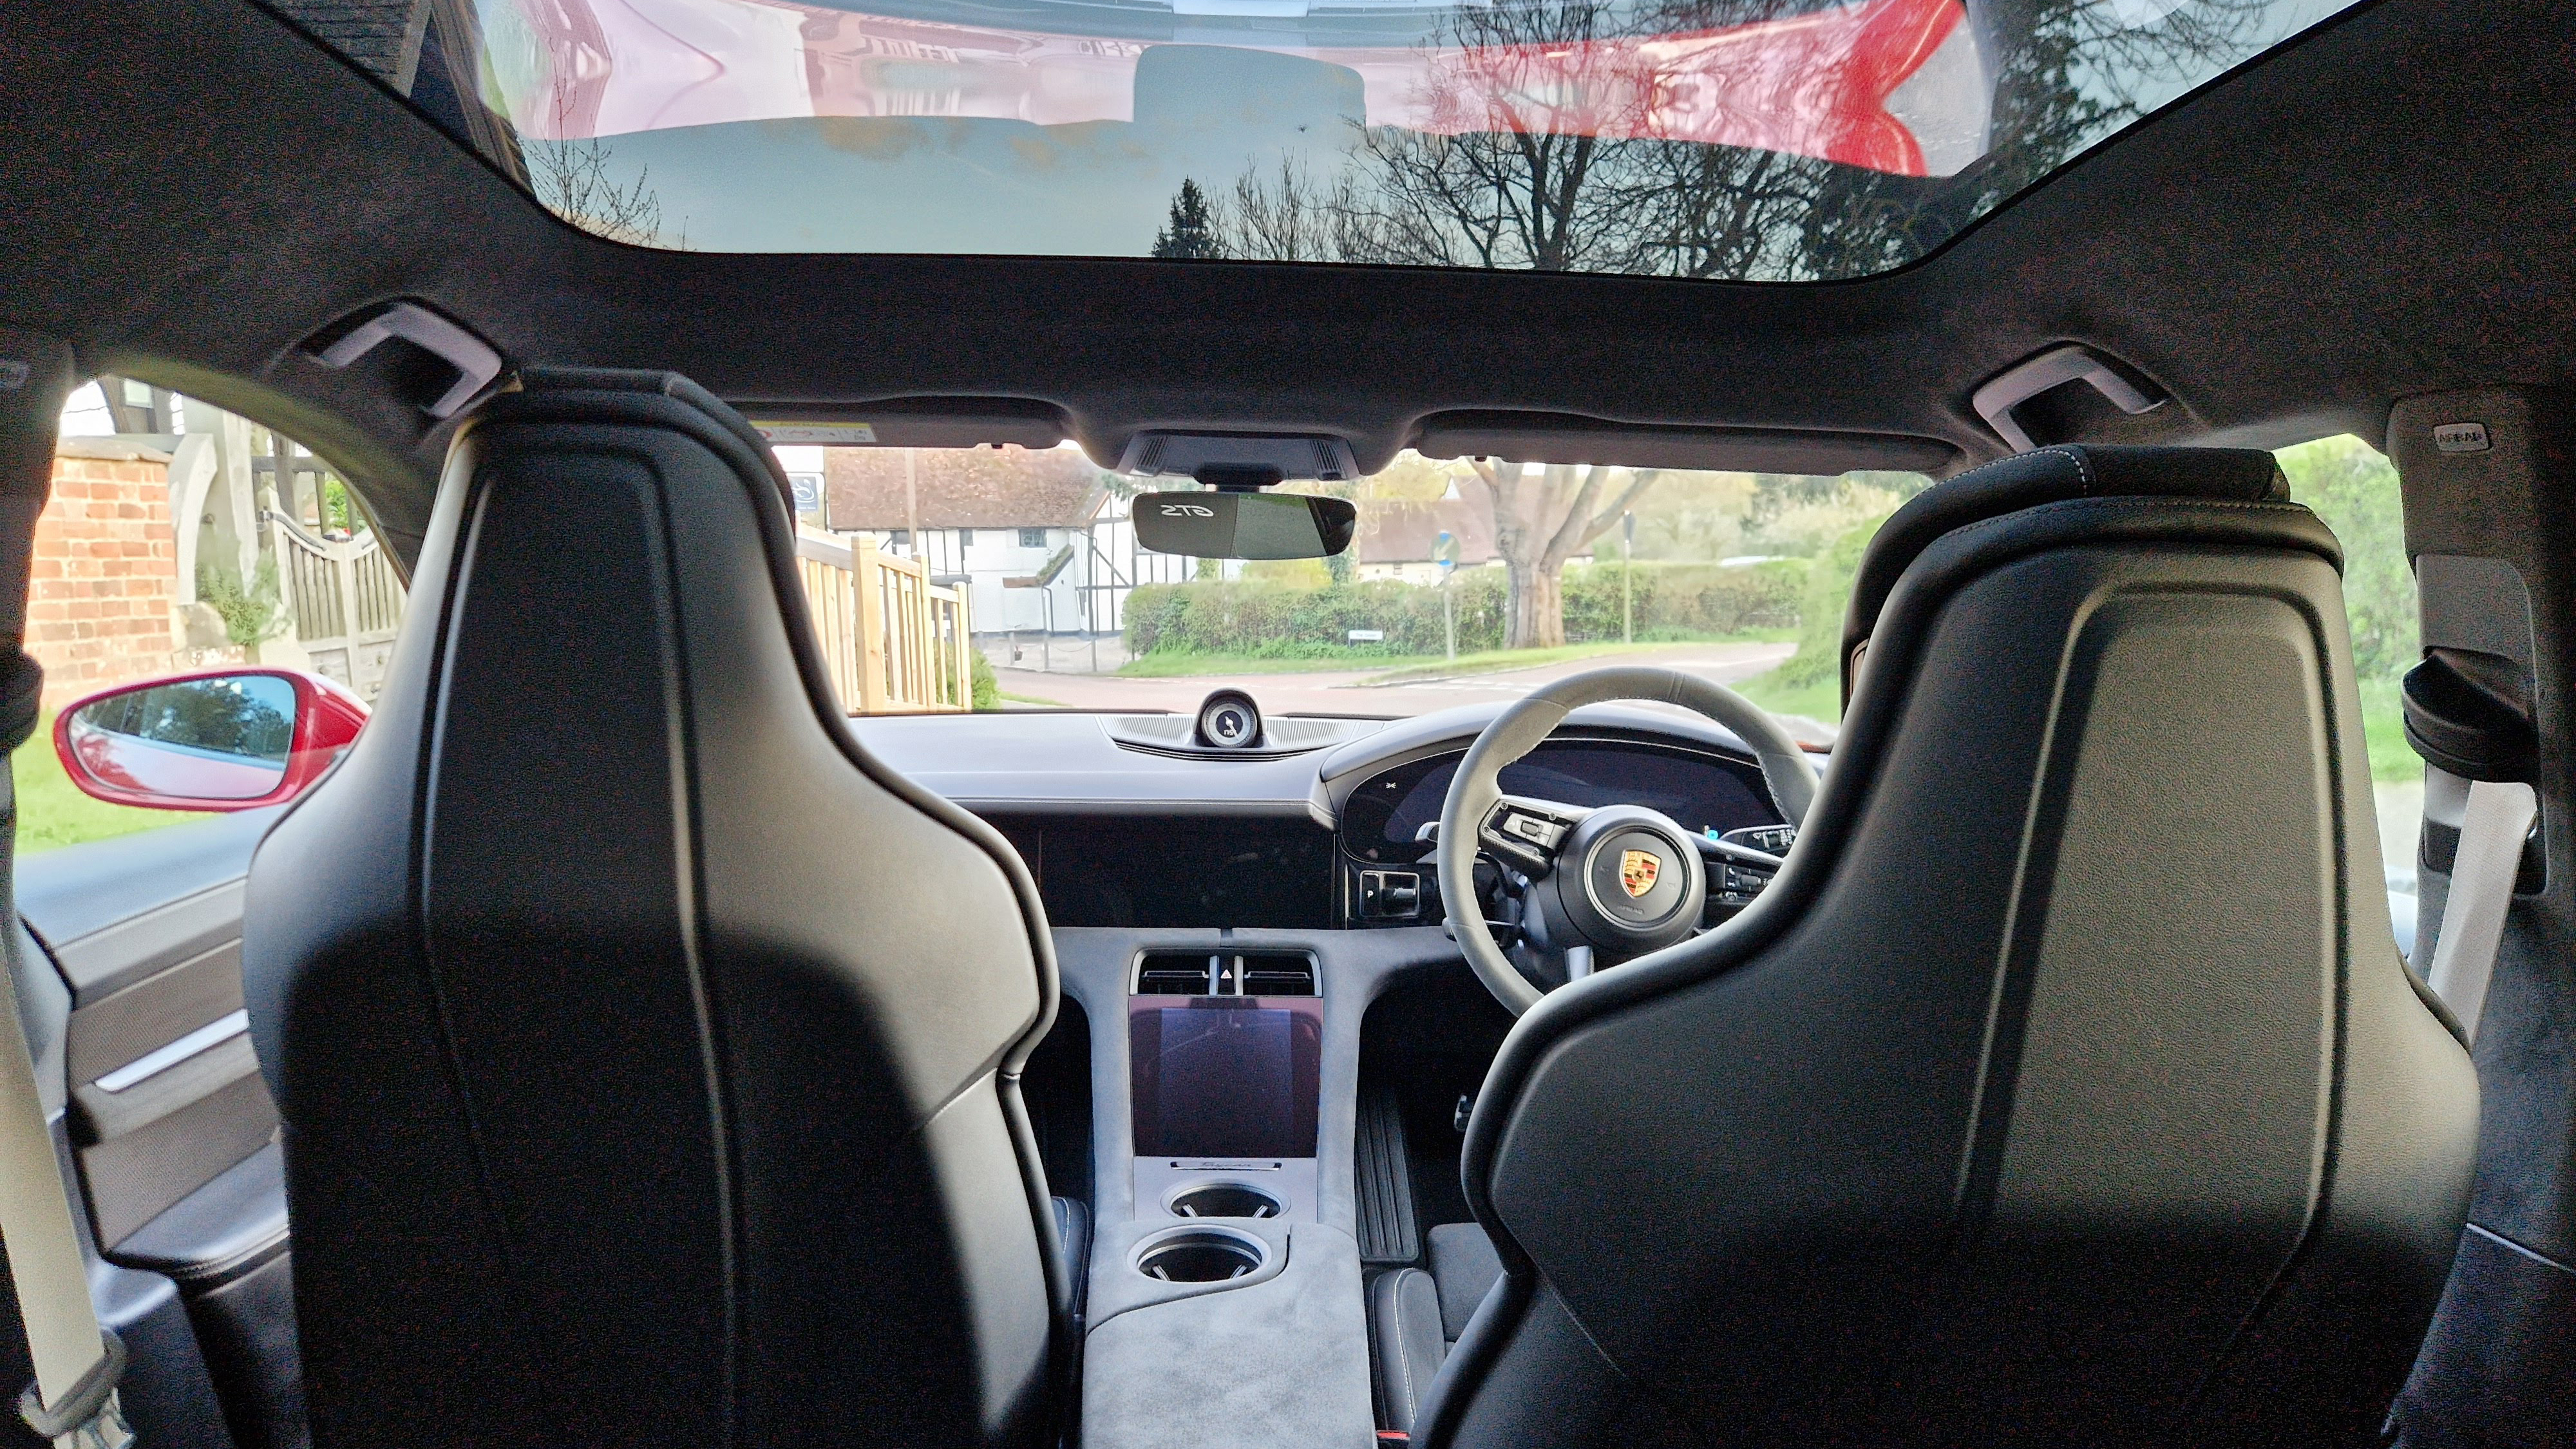 photo taken from the interior of the vehicle showing the full panoramic sunroof